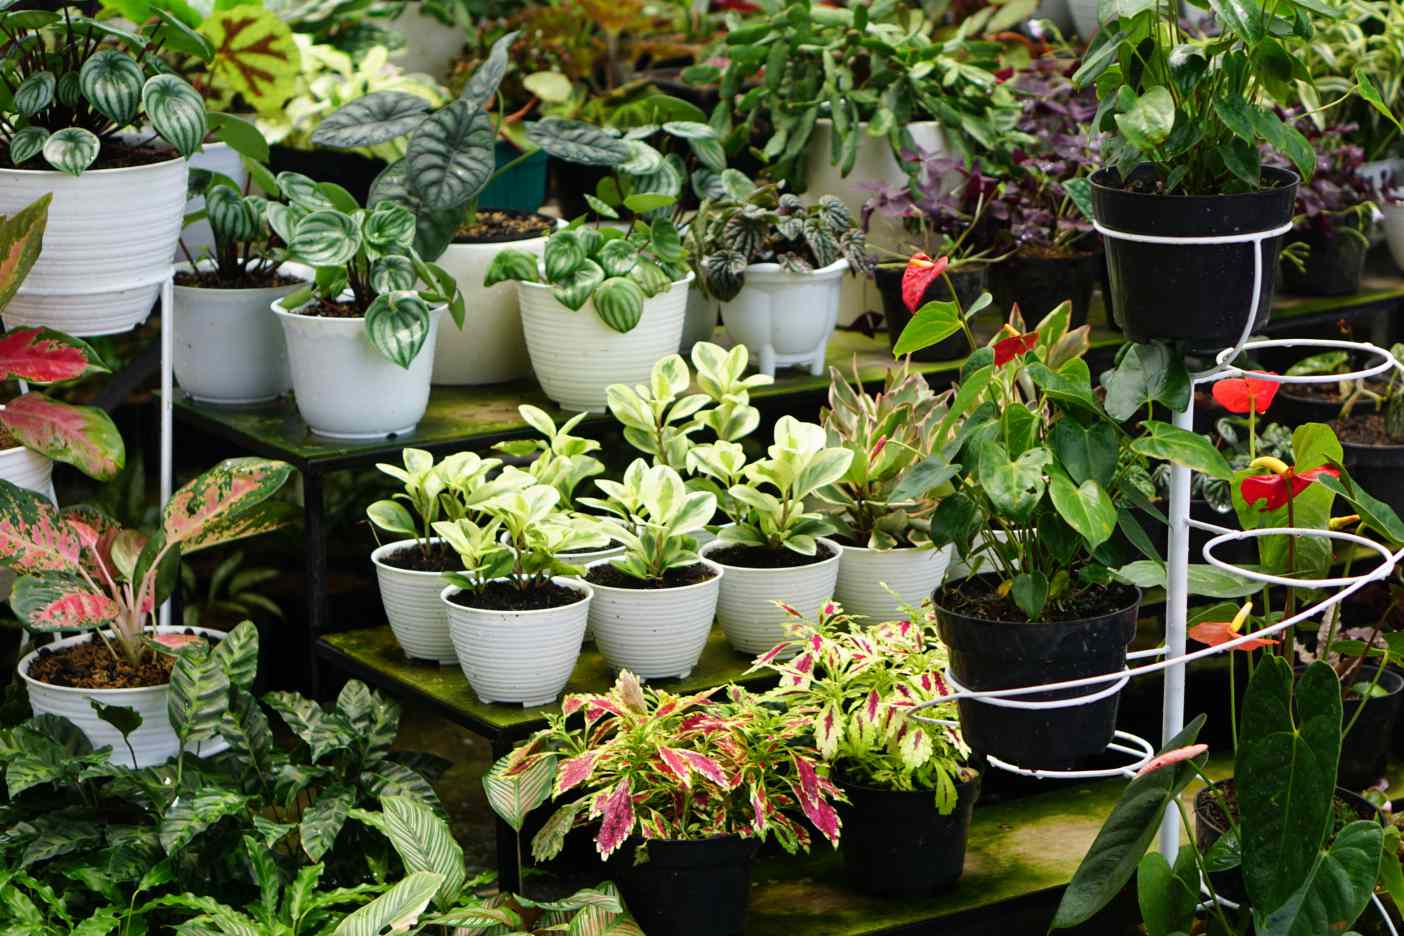 Caring for Your Planter and Plant